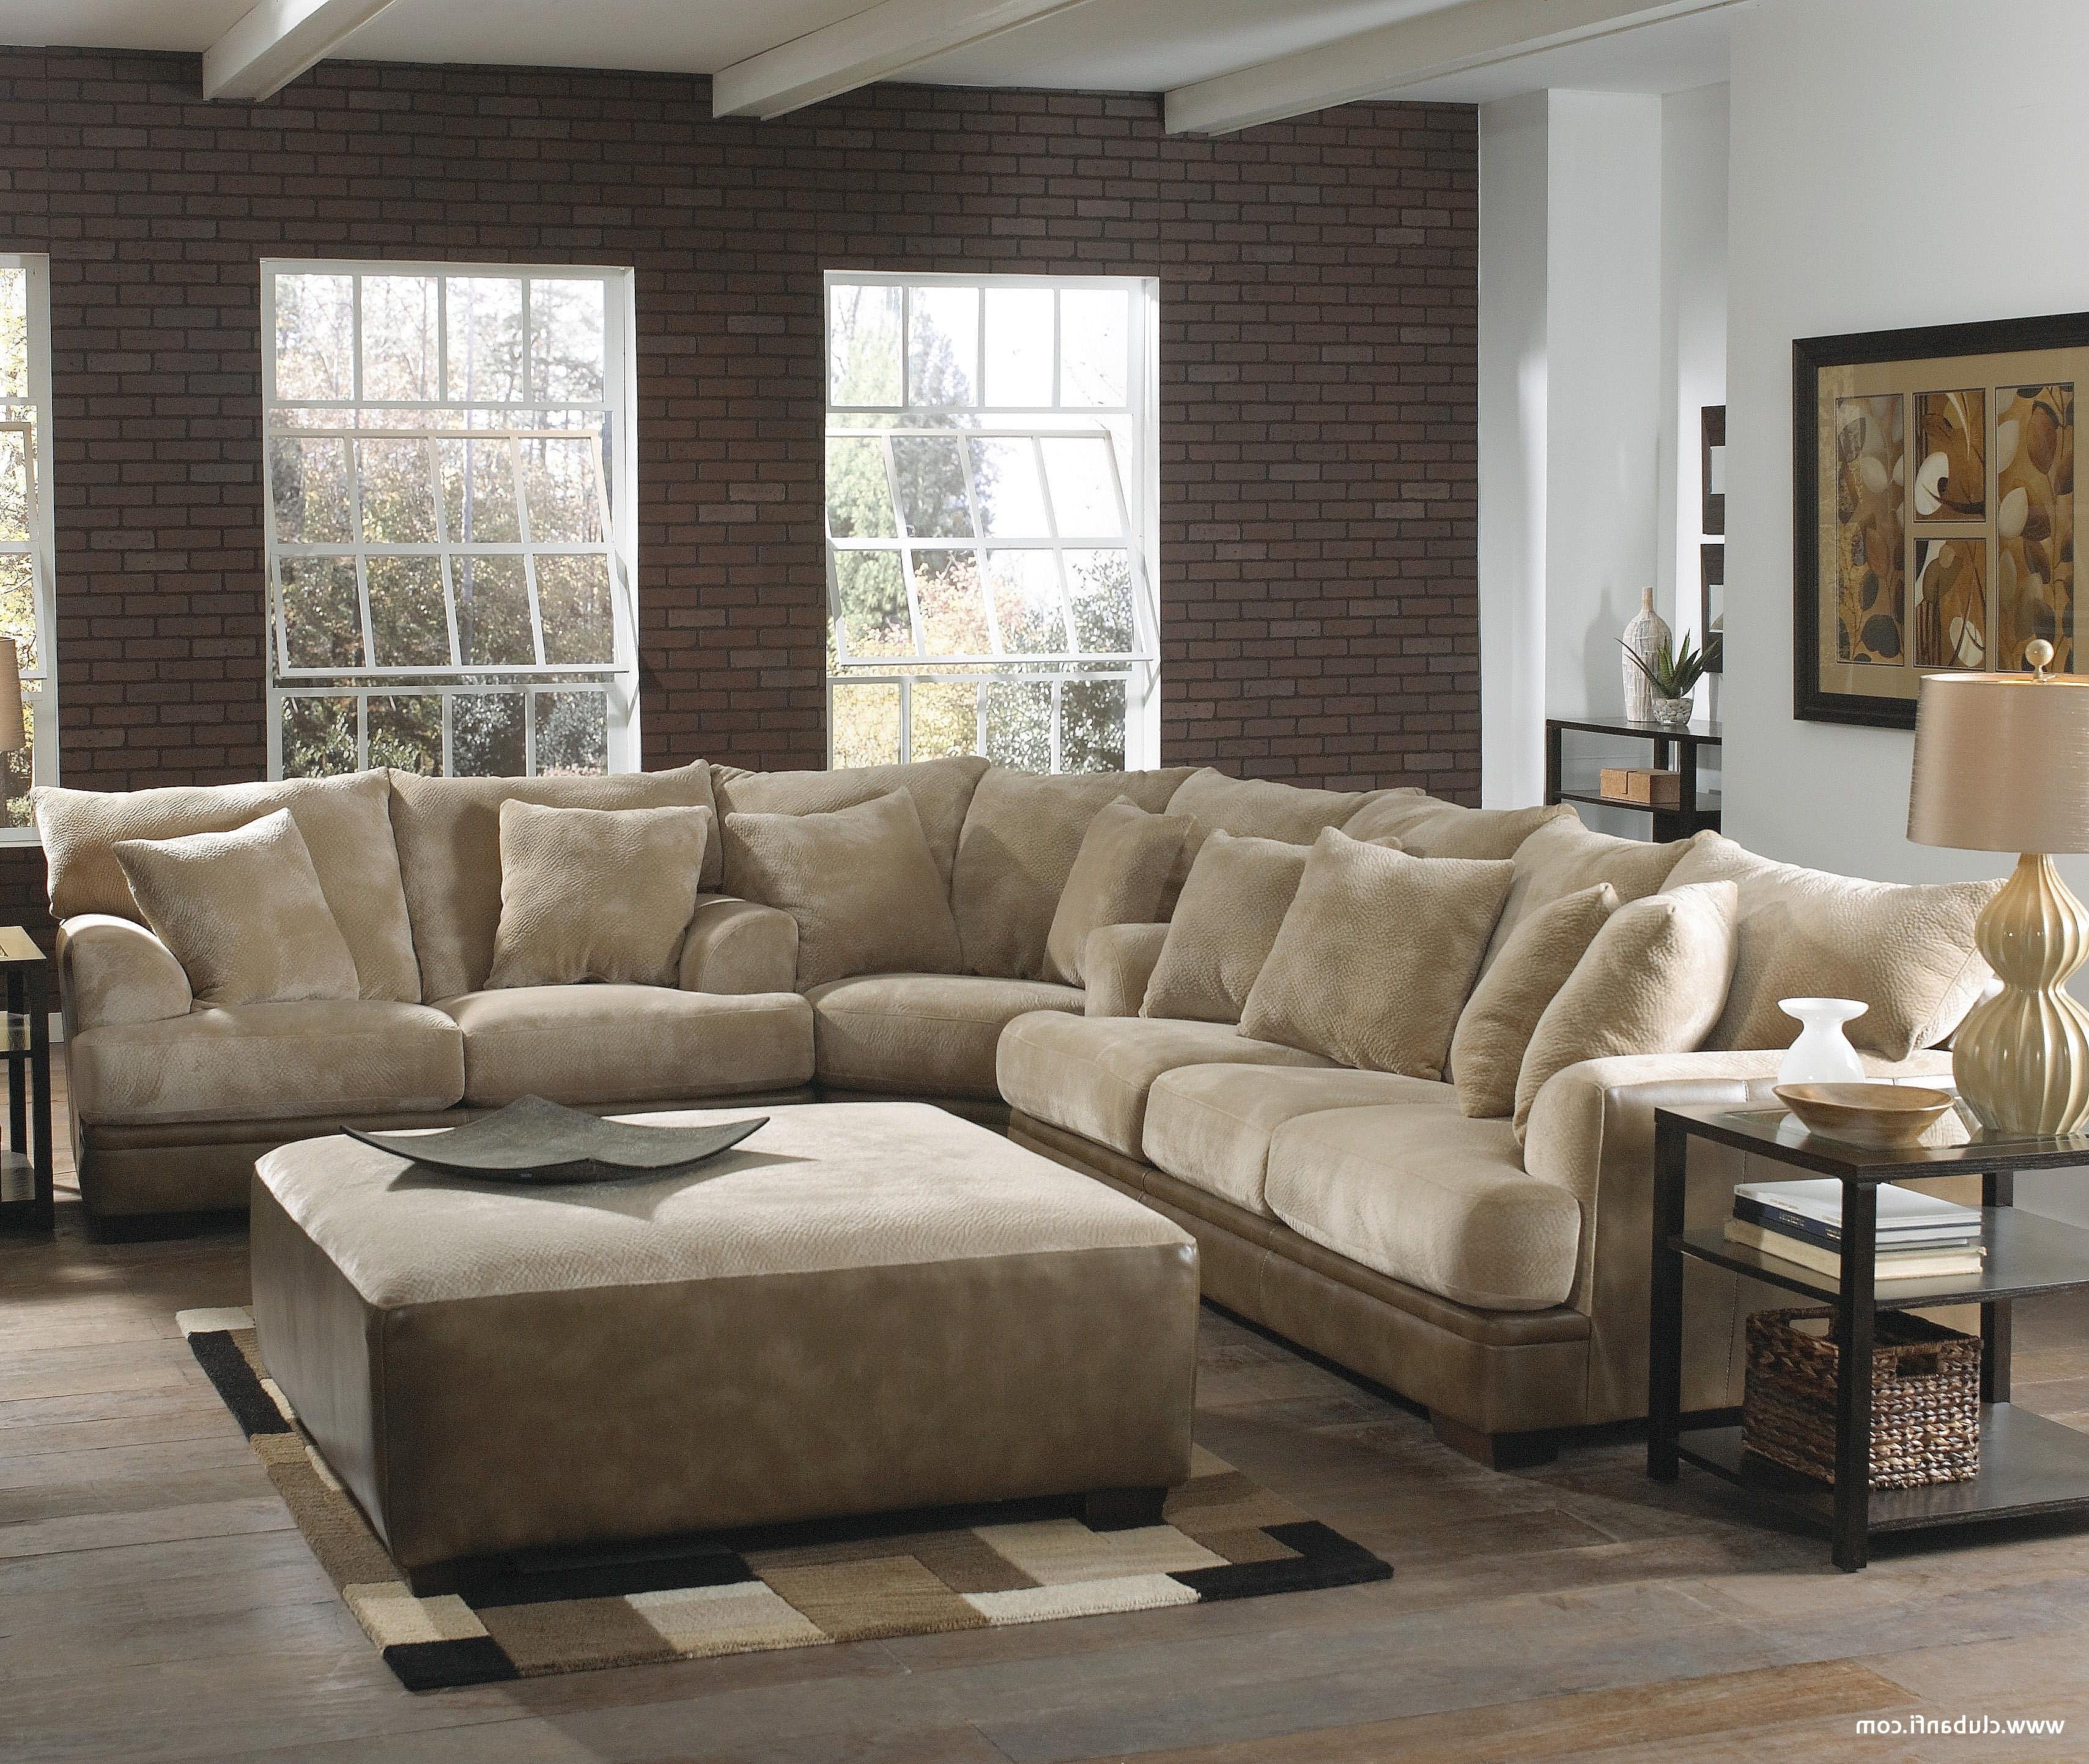 Popular Picture 6 Of 34 – Plush Sectional Sofas Luxury Living Room Deep Pertaining To Plush Sectional Sofas (View 5 of 15)